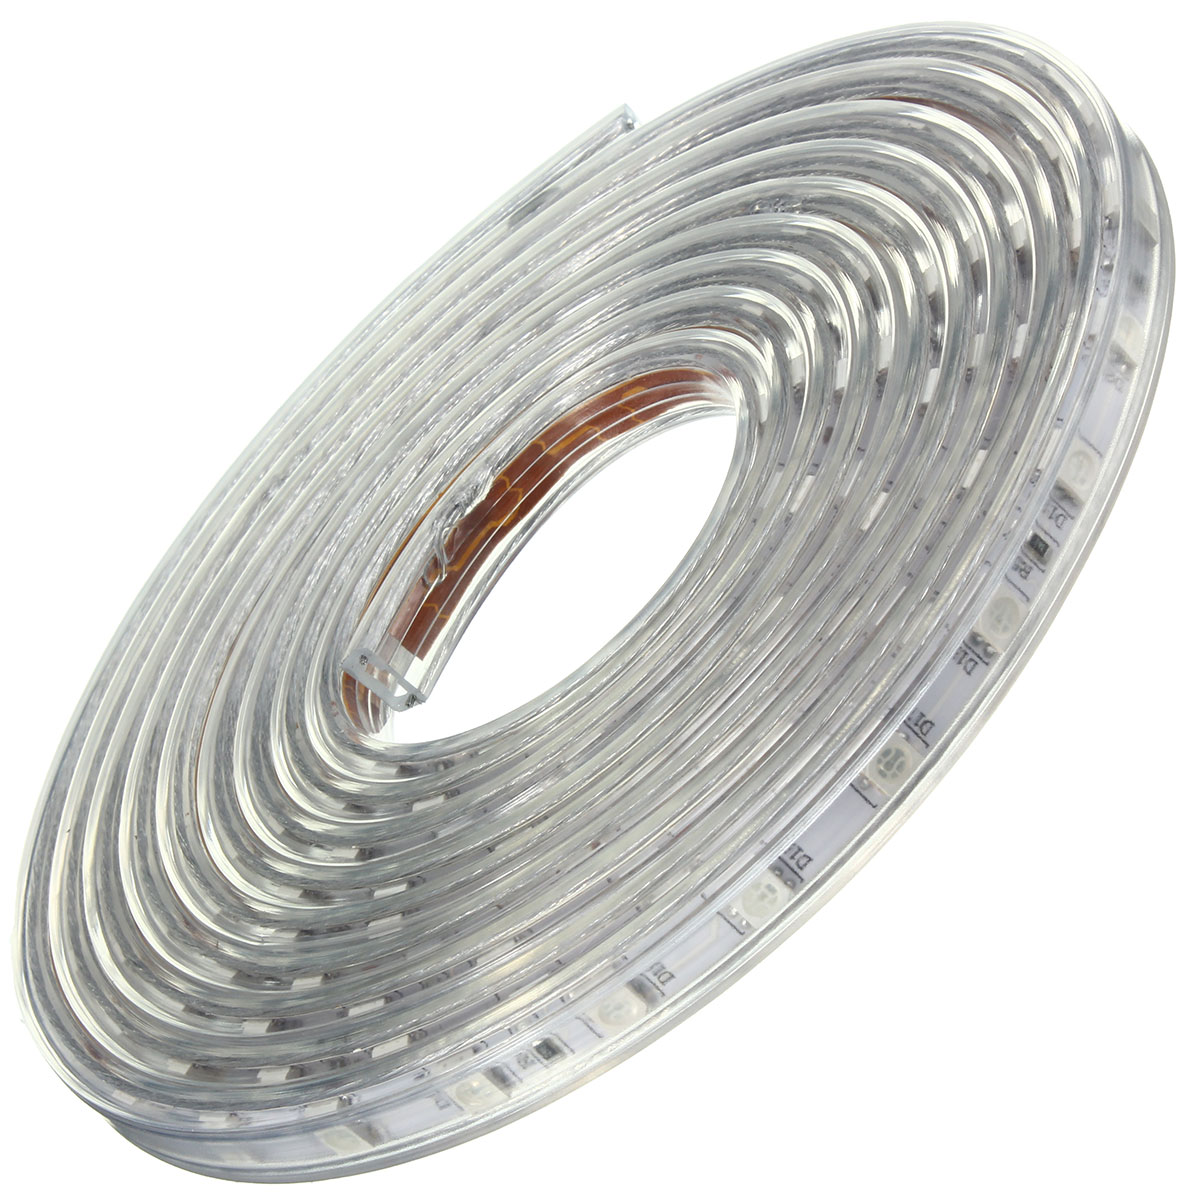 Find 4M 5050 LED SMD Outdoor Waterproof Flexible Tape Rope Strip Light Xmas 220V for Sale on Gipsybee.com with cryptocurrencies